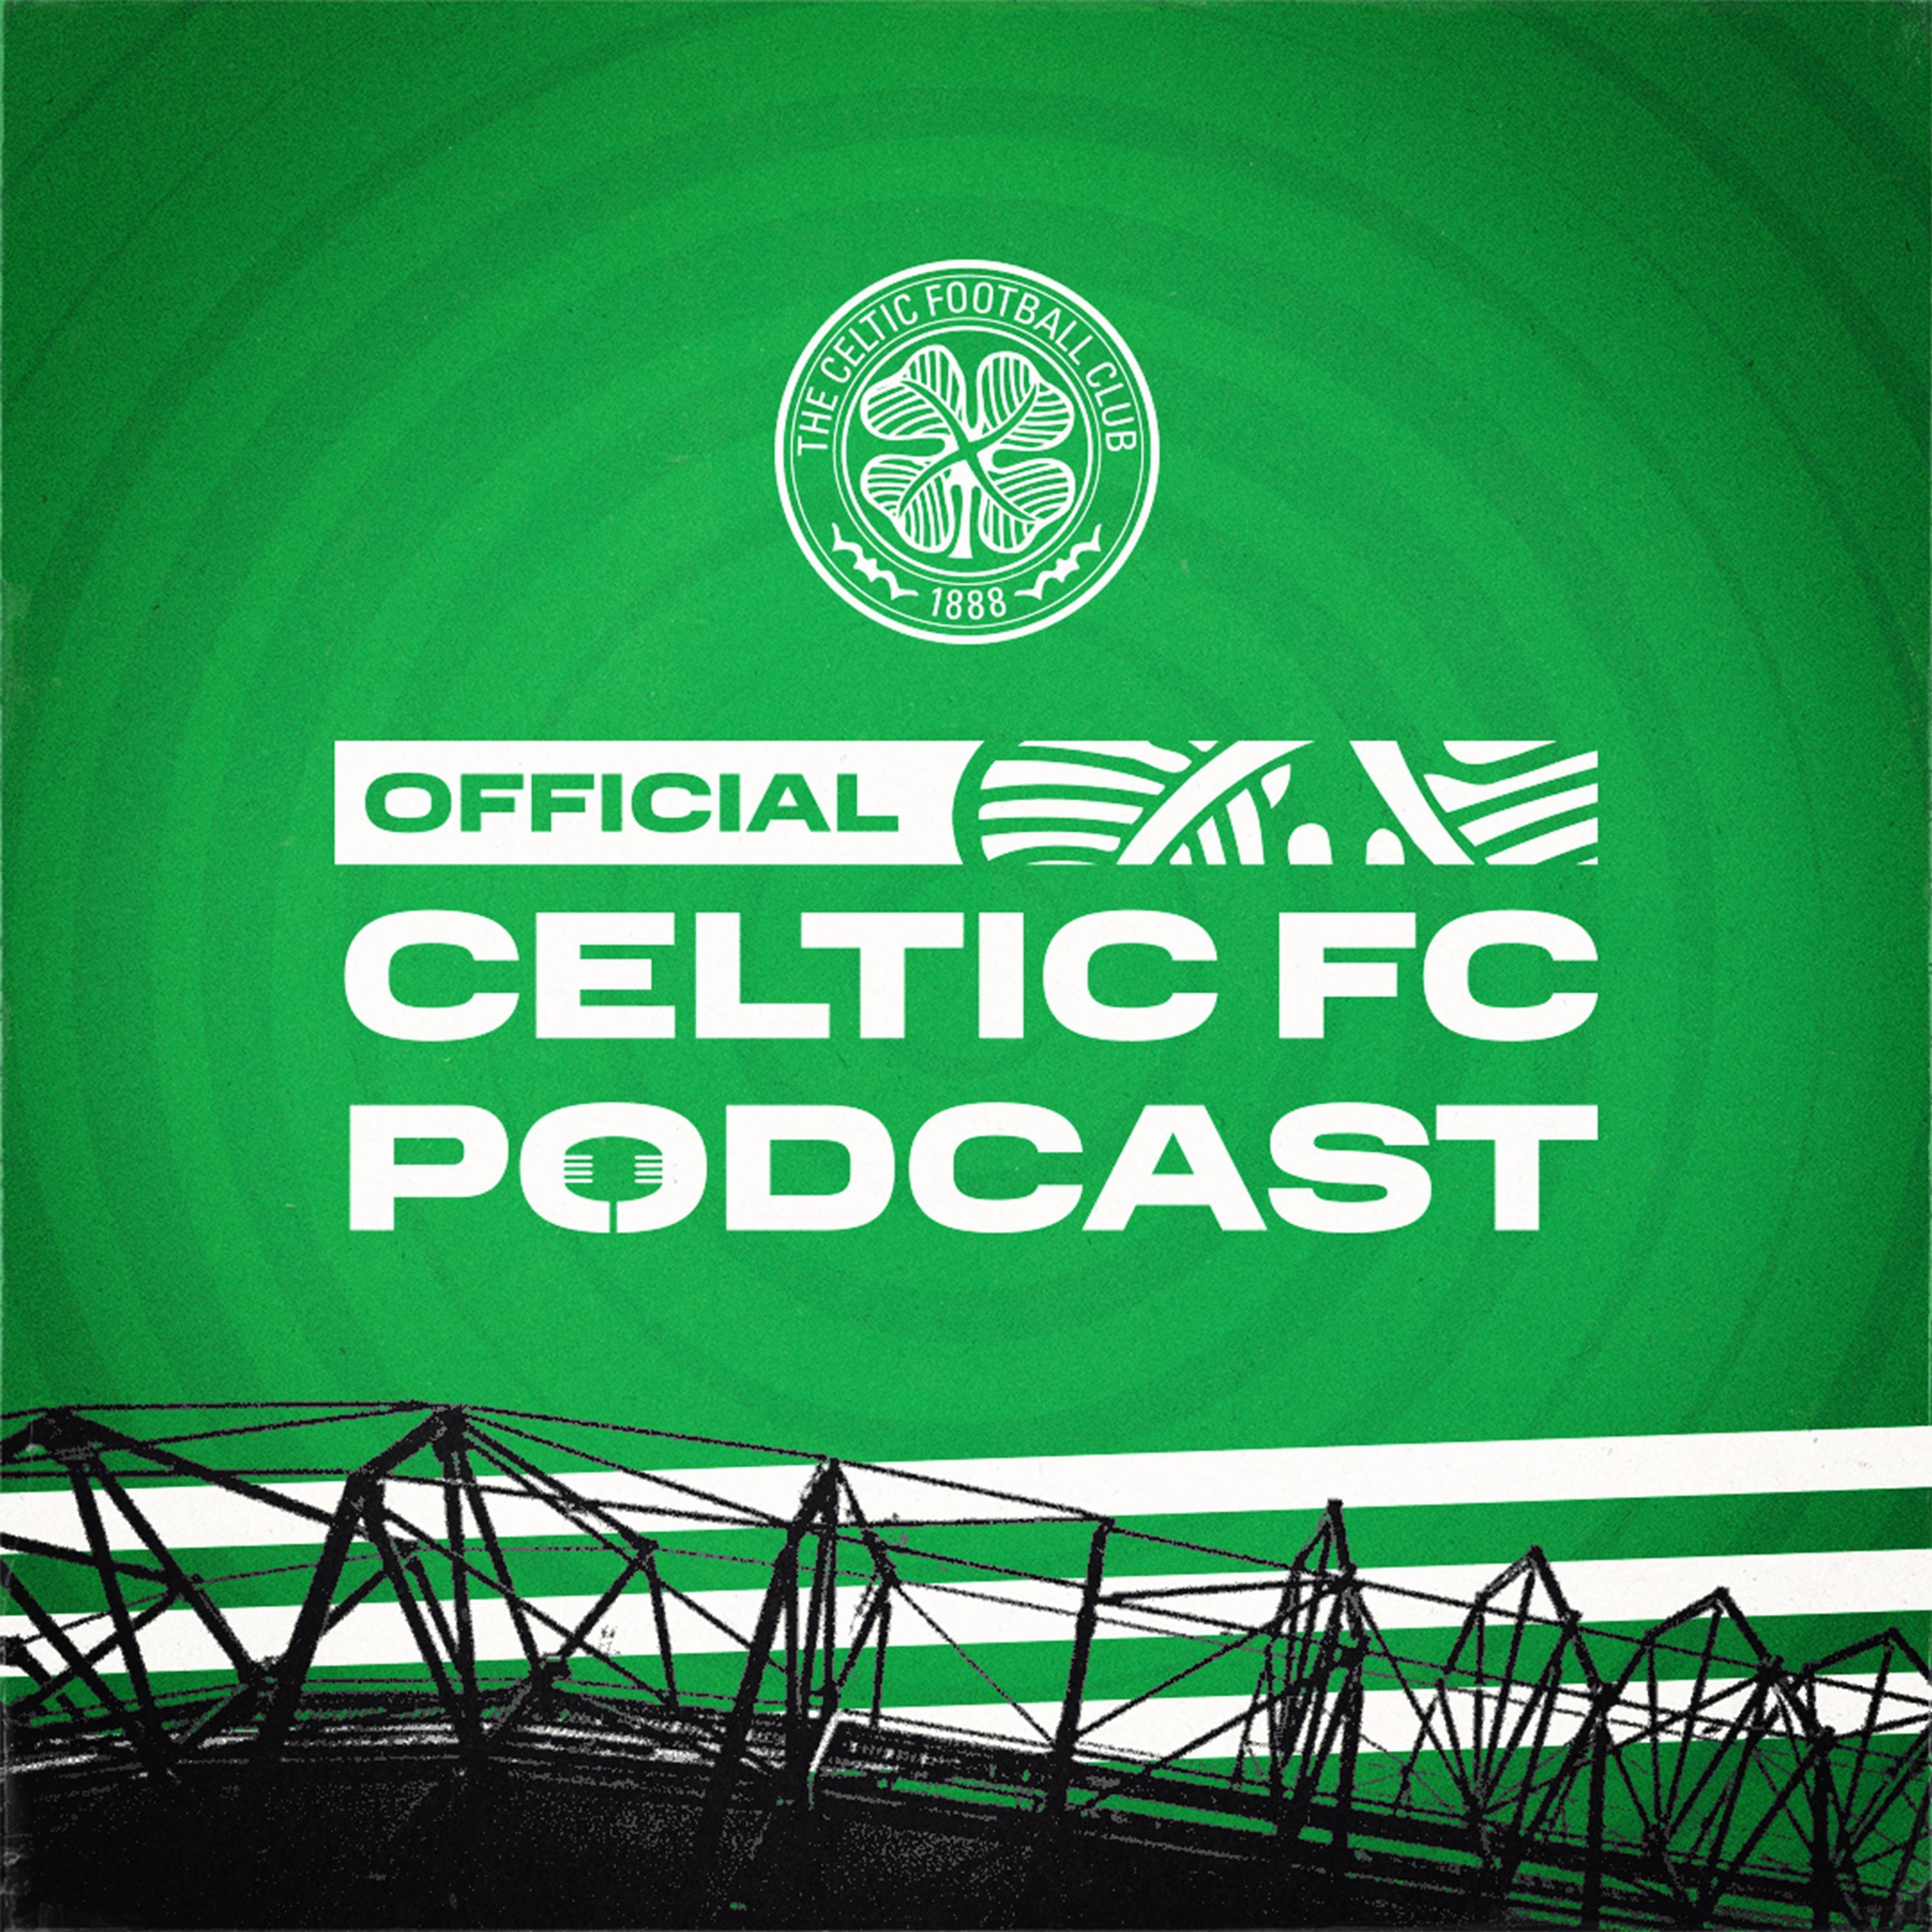 Joe Ledley on Celtic’s Welsh connections, Champions League highlights and his upcoming return to Paradise for the Foundation Legends Charity Match!